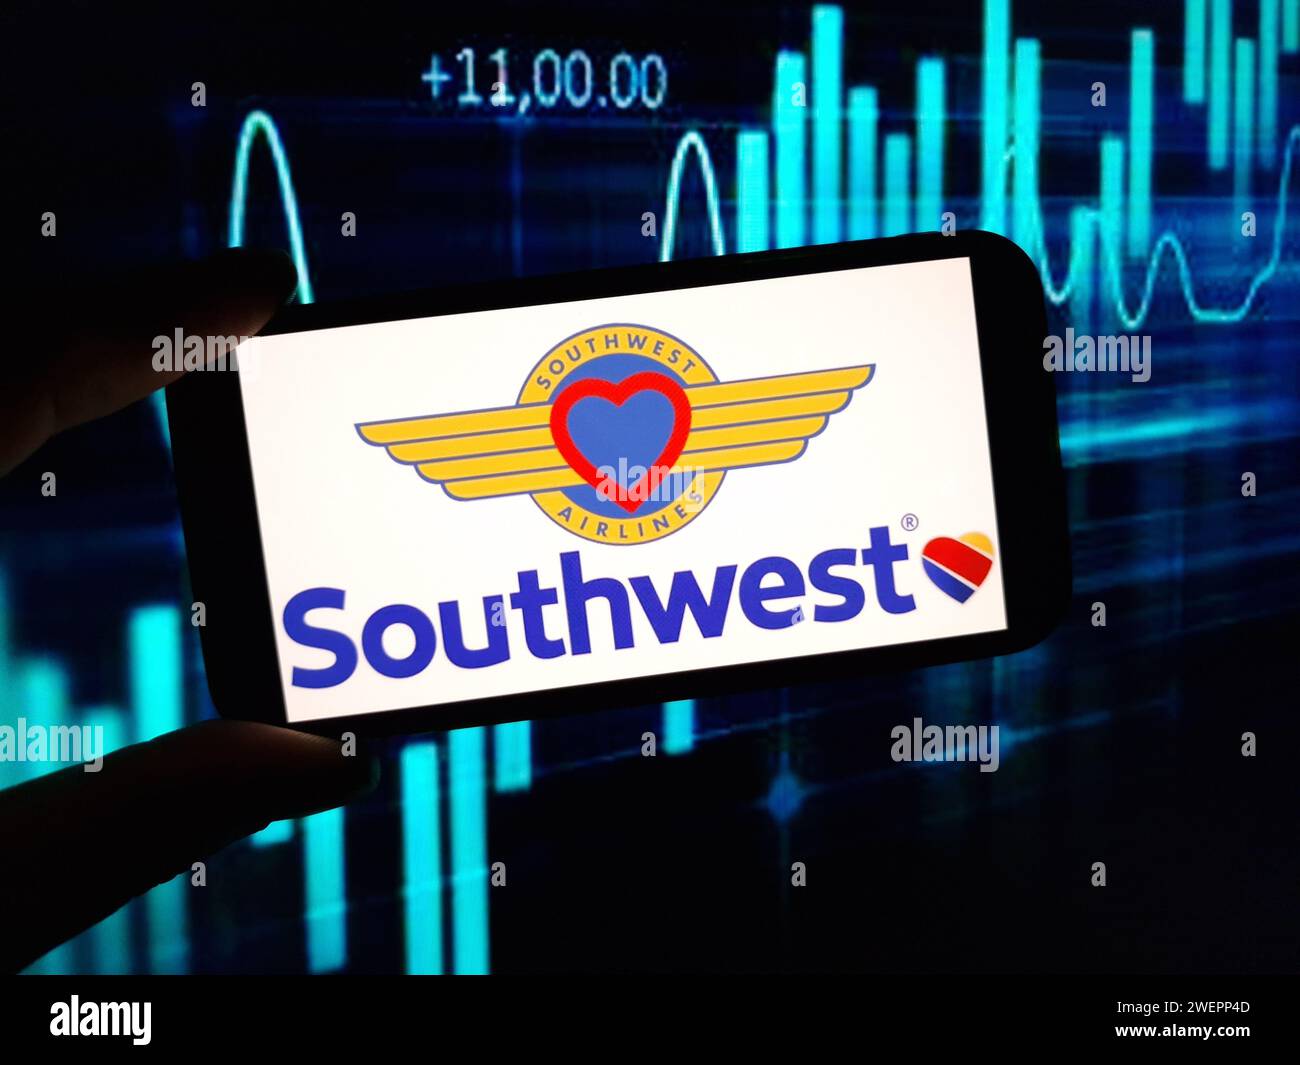 Konskie, Poland - January 25, 2024: Southwest Airlines company logo displayed on mobile phone screen Stock Photo